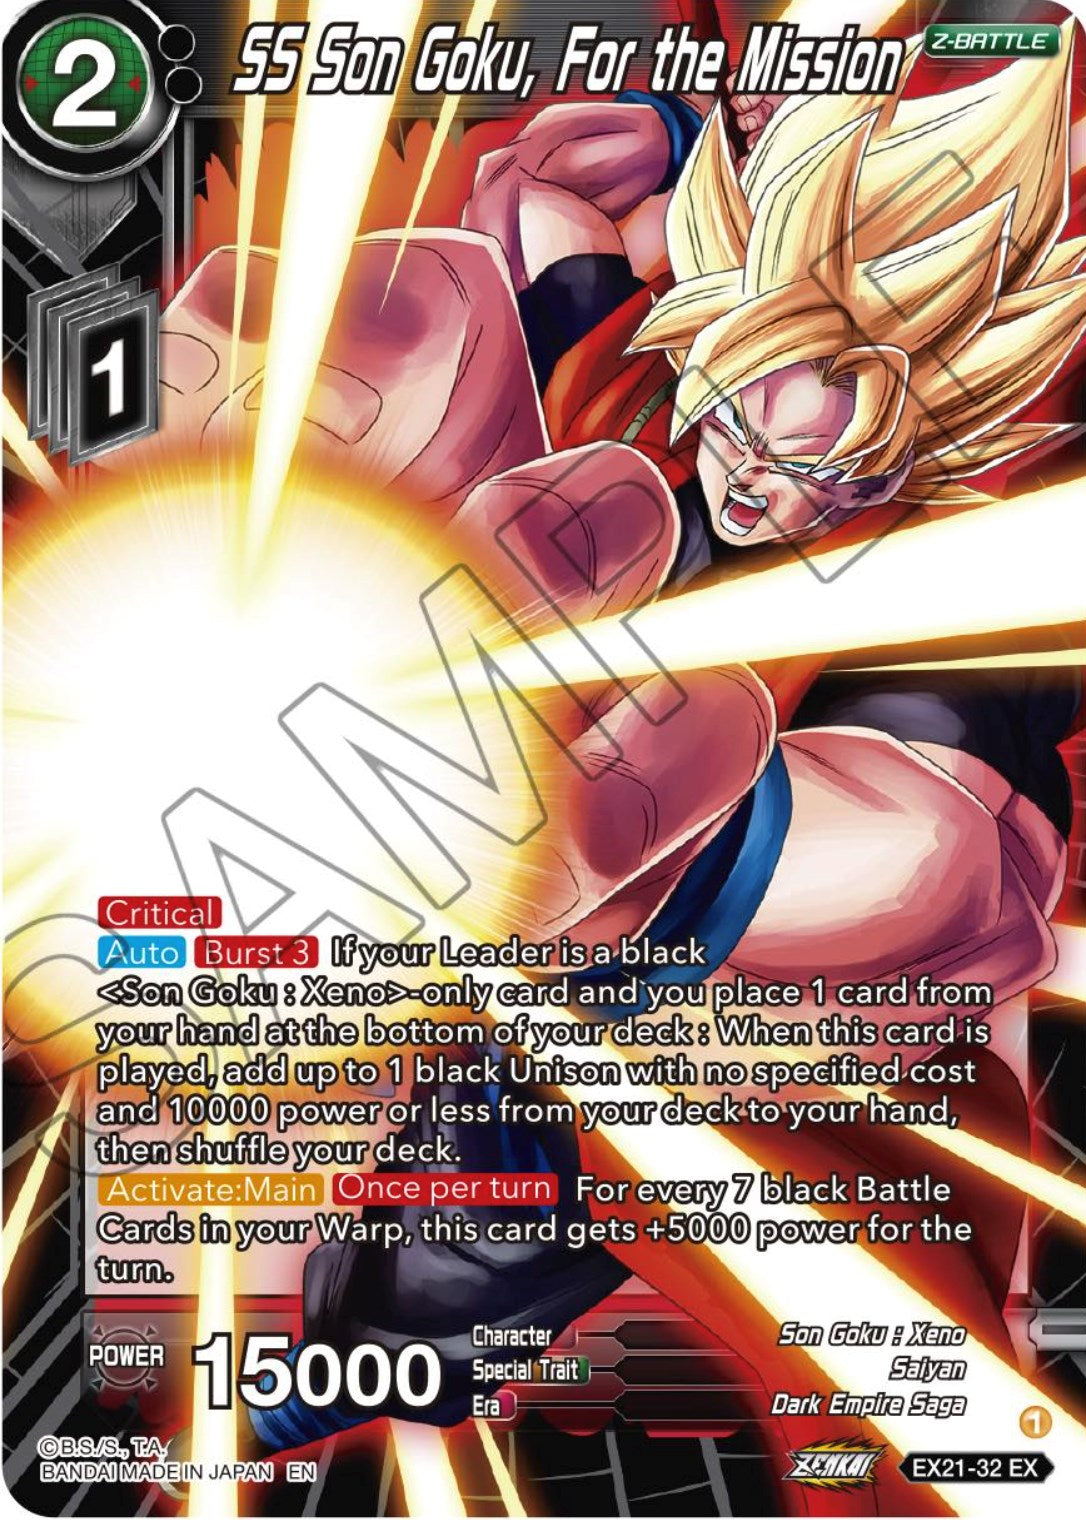 SS Son Goku, For the Mission (EX21-32) [5th Anniversary Set] | Amazing Games TCG